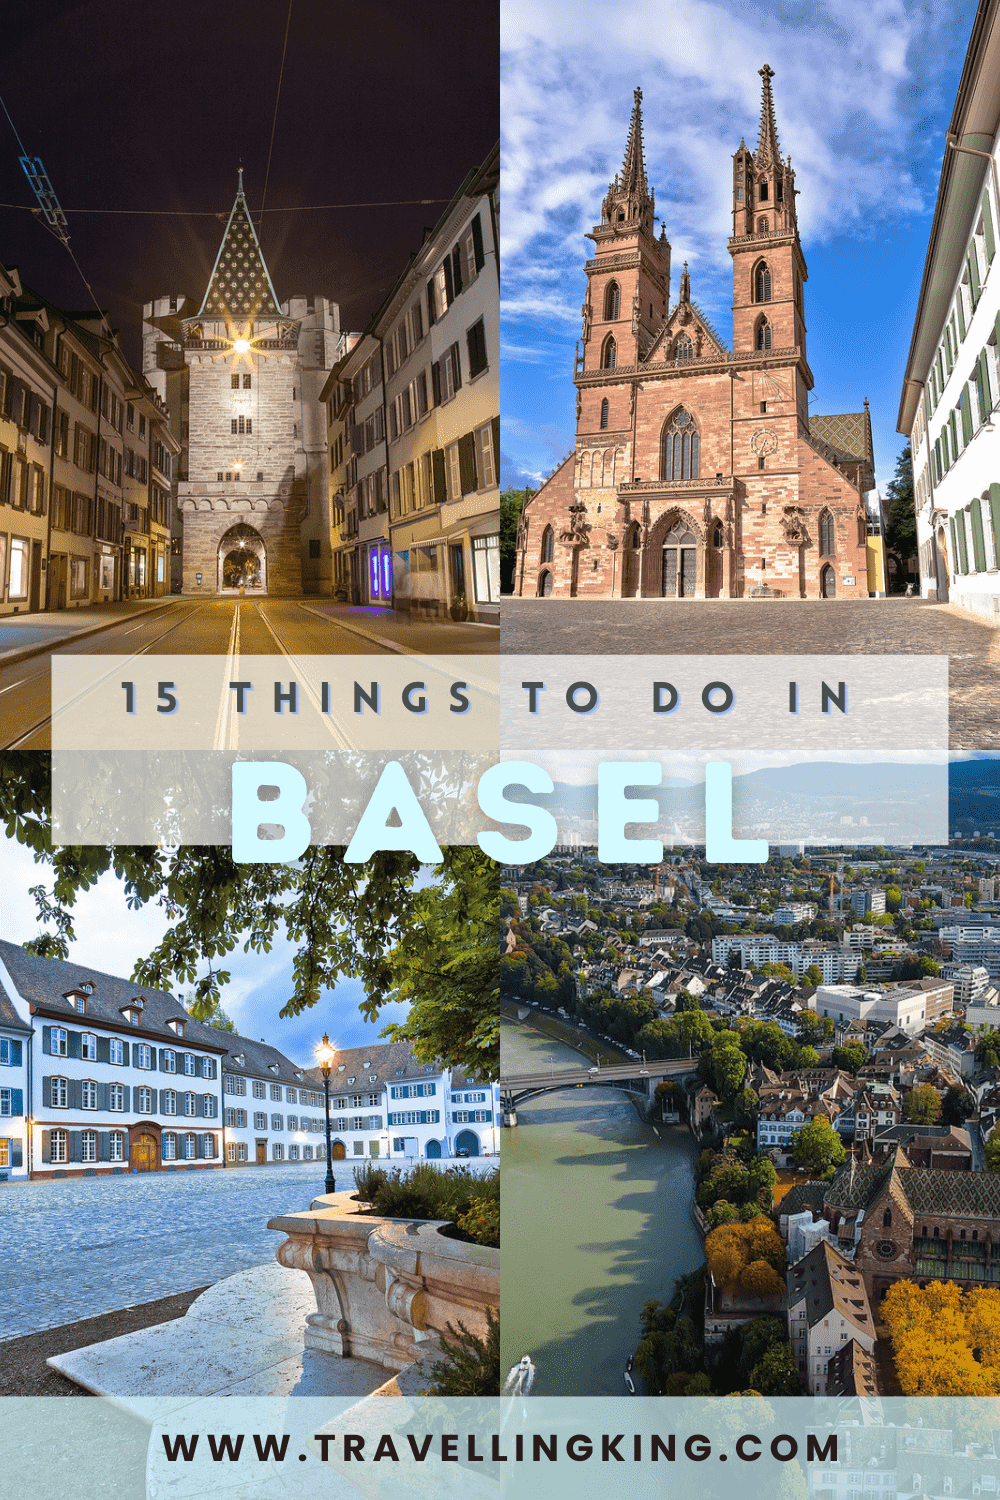 15 Things to do in Basel - That People Actually Do!